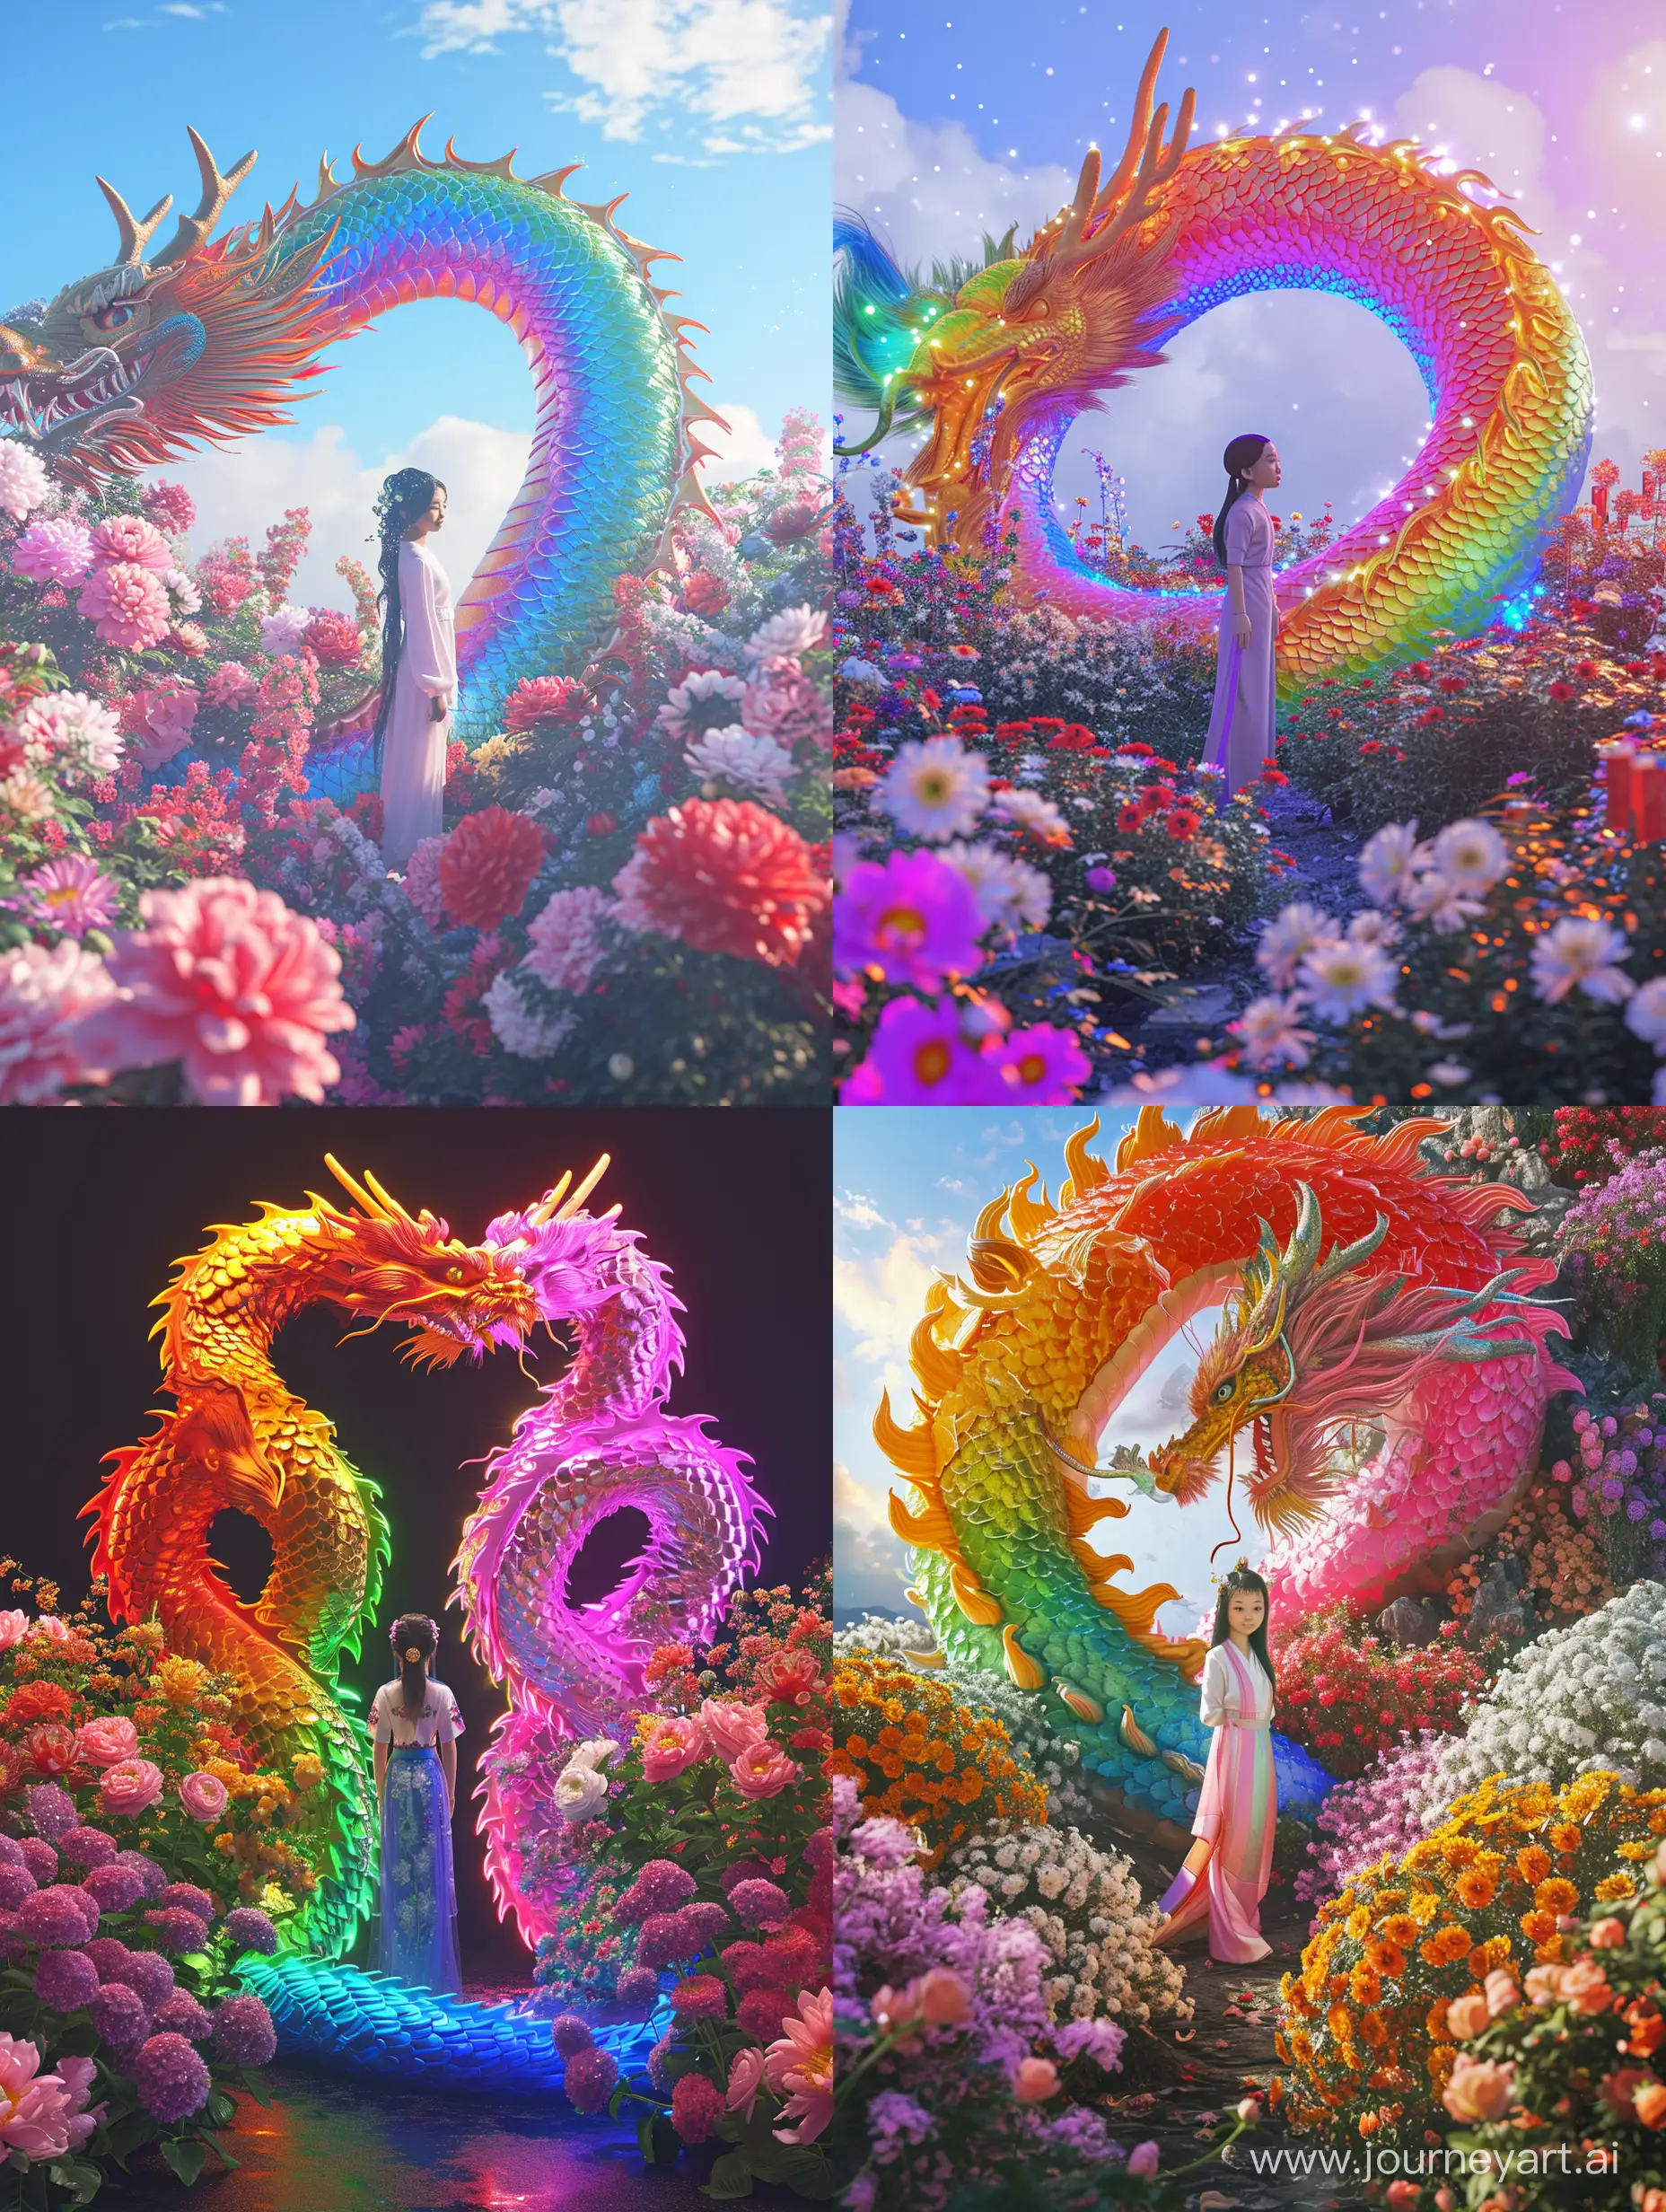 long shot,In front of rainbow dragon stands a Chinese girl,16 years old,Flowers surrounded her,grand scene, minimalism, Chinese dragon, C4D rendering, Surrealism, master works, movie lighting, Ultra HD, fine detail, color rating, 32K HD